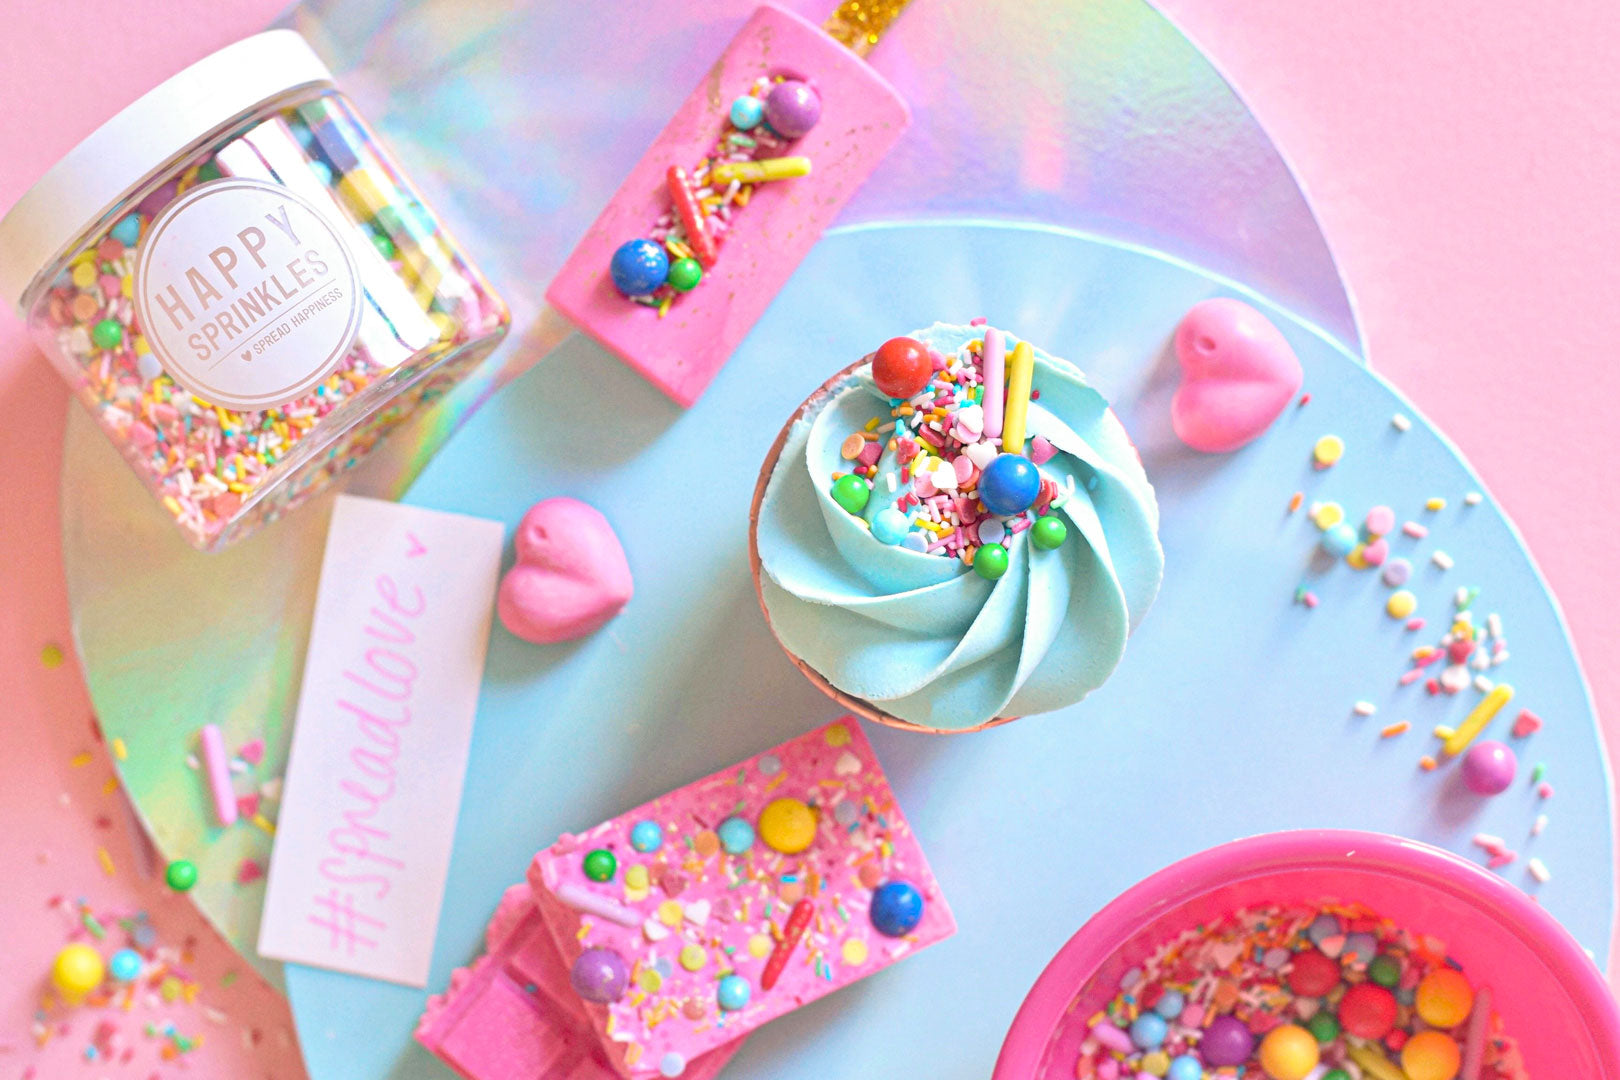 Cake Decoration: Sprinkles, Edible Wafer Paper More For, 49% OFF